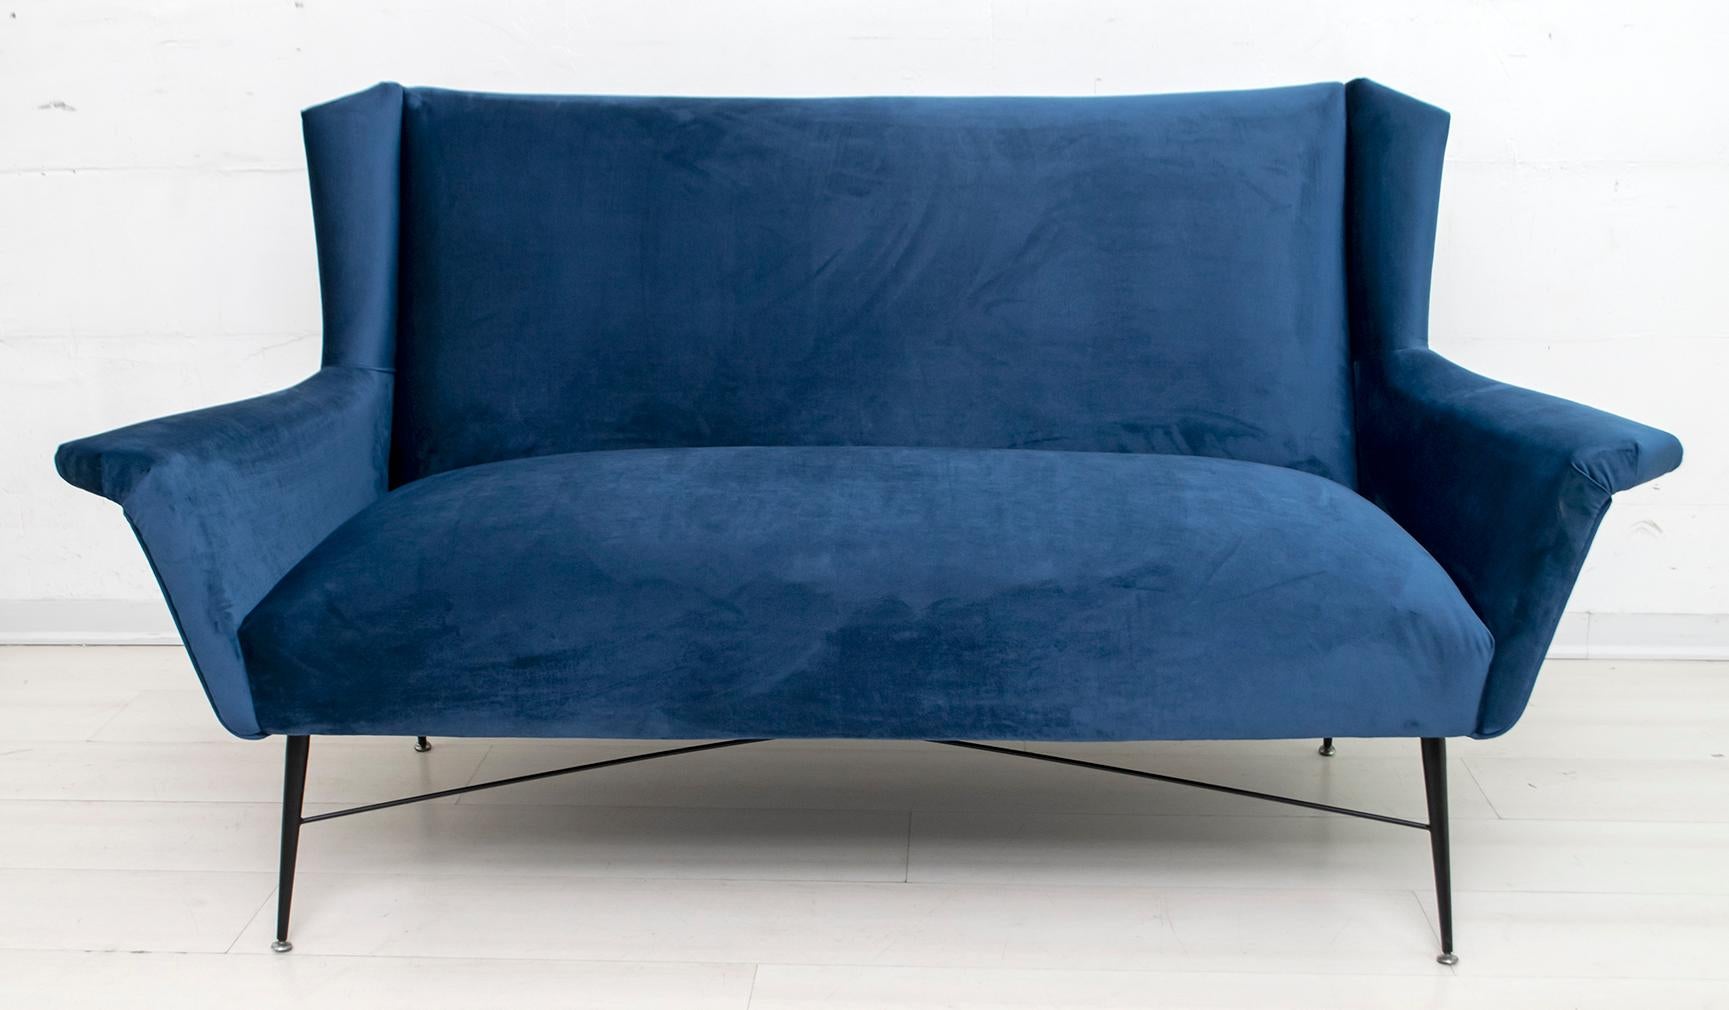 Sofa designed by Gigi Radice for Minotti. Made with solid wood structure and blue velvet upholstery and black lacquered metal legs. The upholstery has been redone.